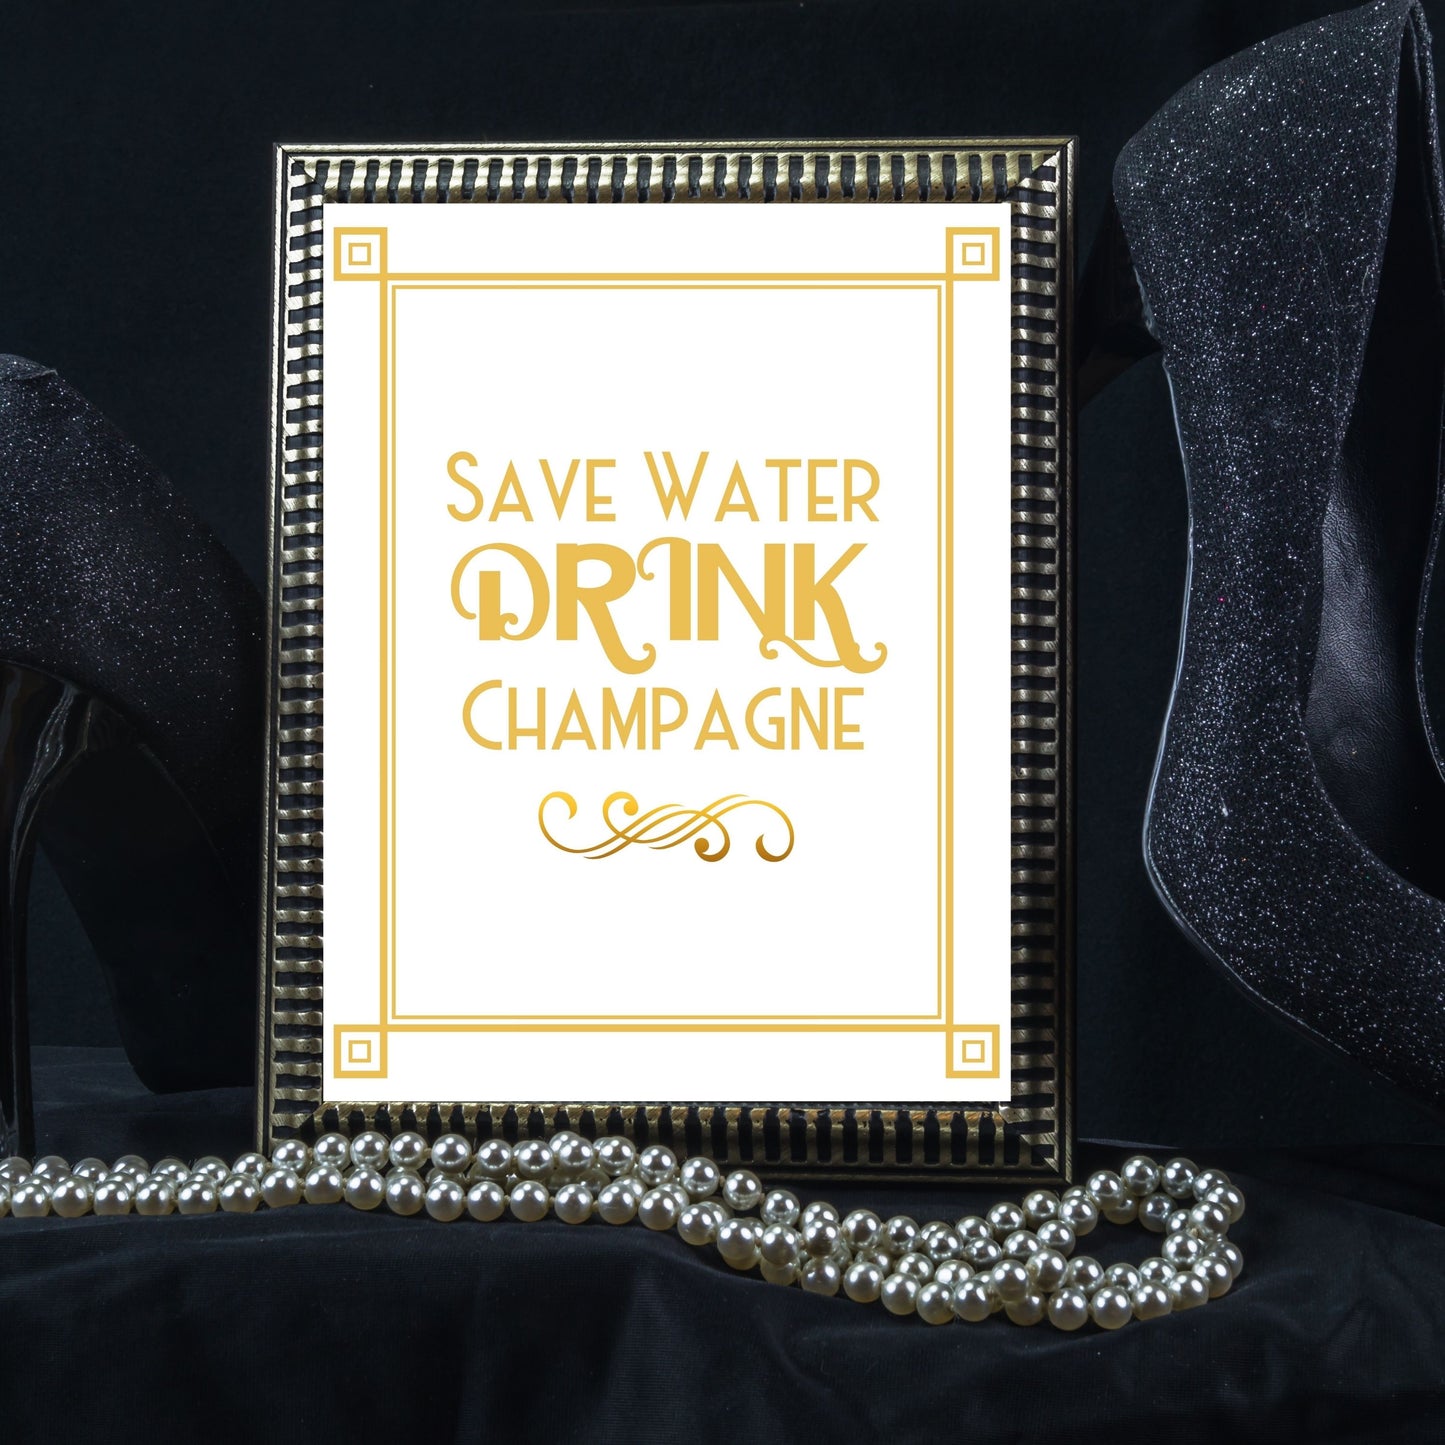 "Save Water Drink Champagne" Printable Party Sign For Great Gatsby or Roaring 20's Party Or Wedding,  White & Gold, Printable Party Decor